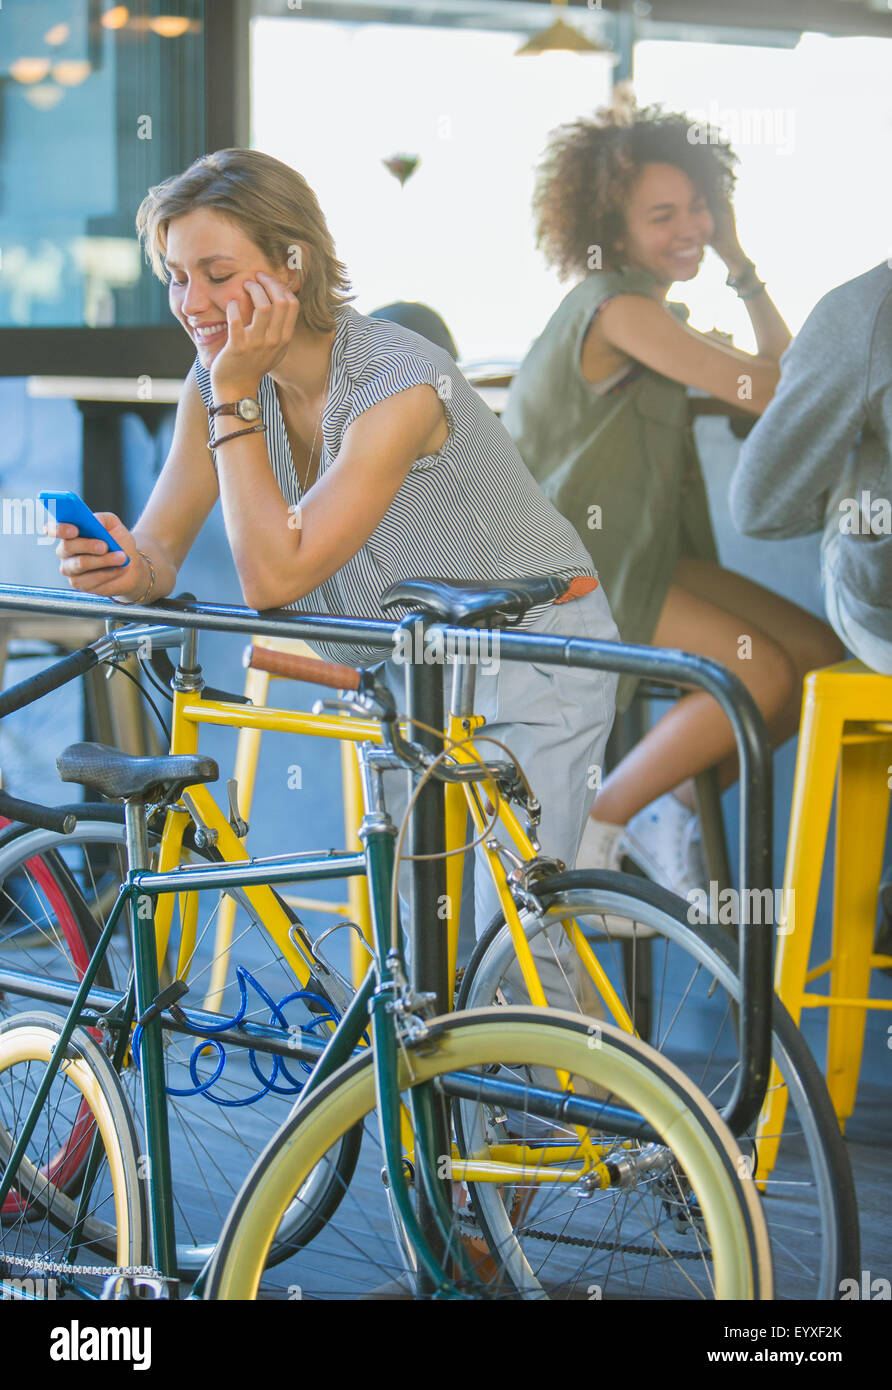 Smiling woman leaning on railing texting with cell phone above bicycle Stock Photo